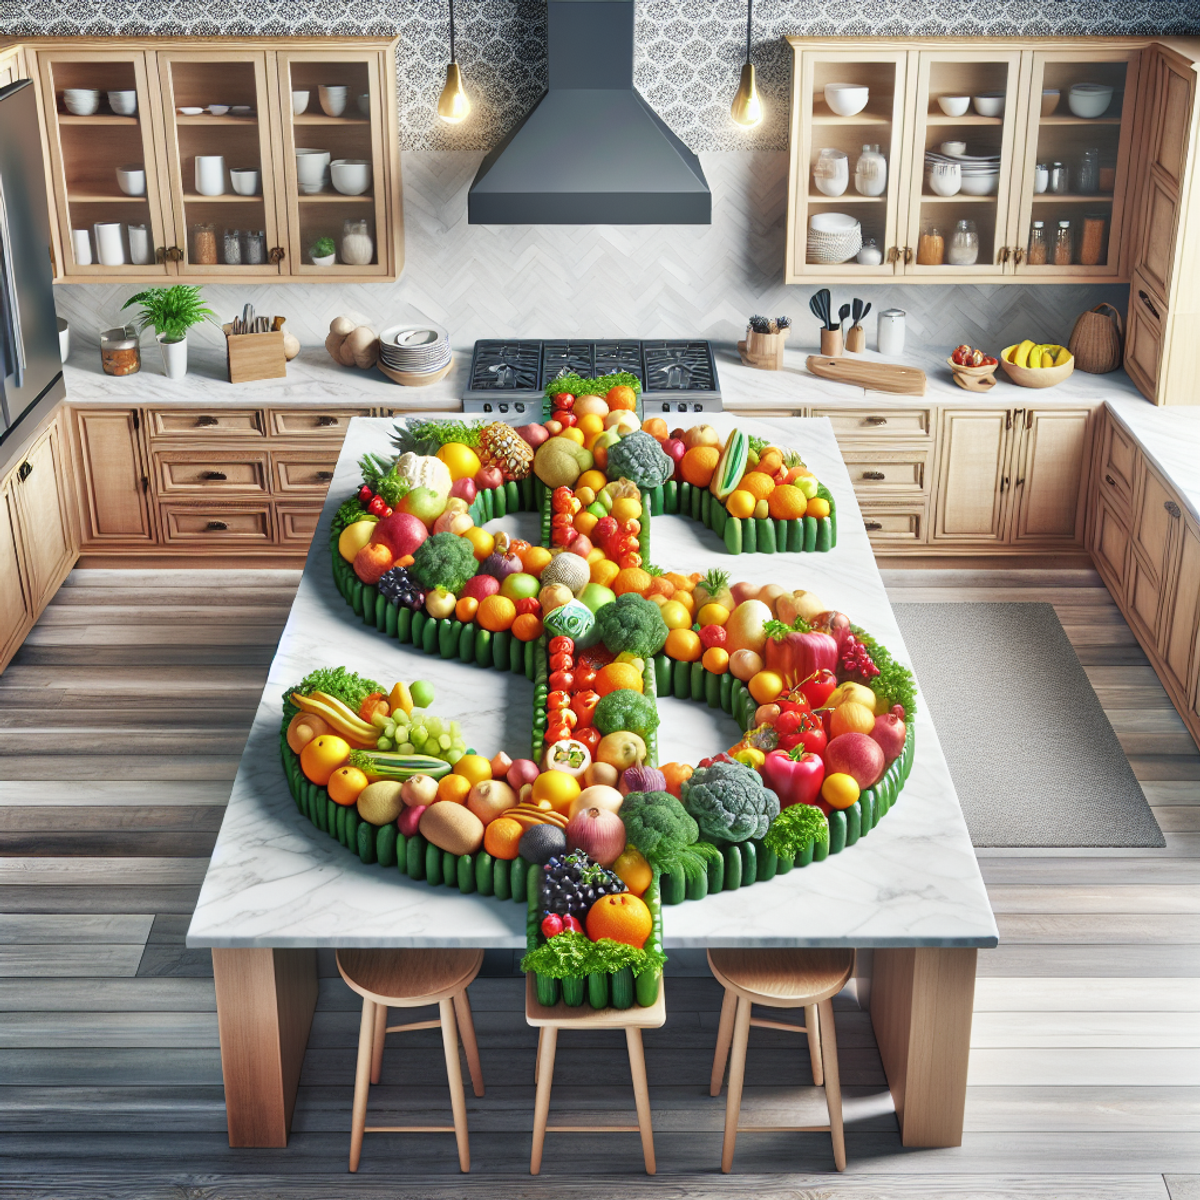 A kitchen with a giant dollar sign made of fresh fruits and vegetables on the countertop.